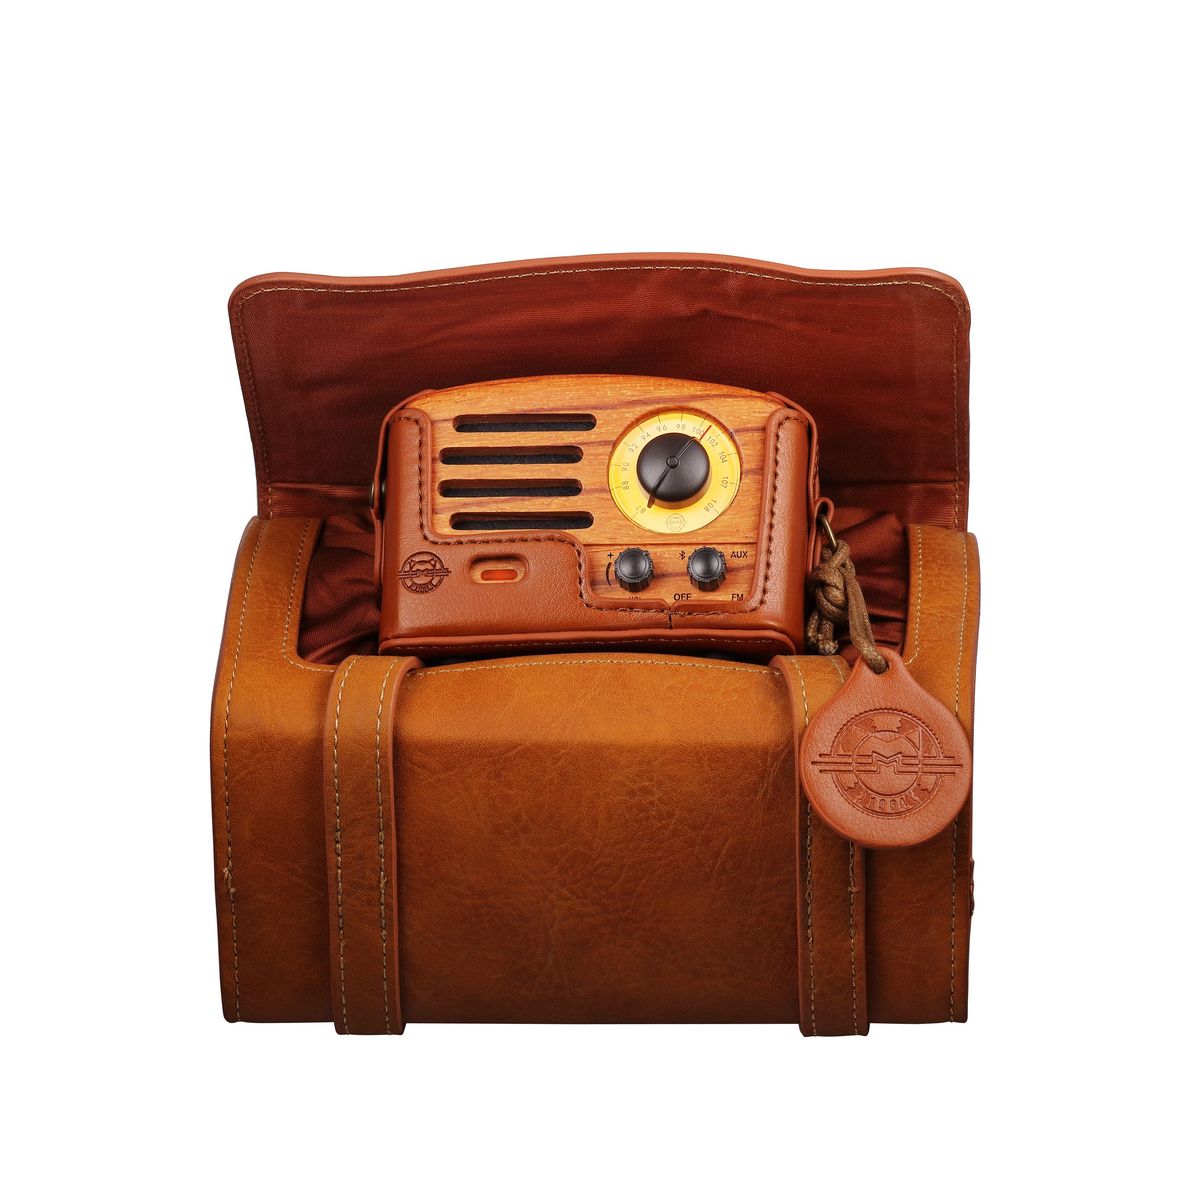 Wooden Bluetooth & FM Radio Speaker With Duffle Bag - Rosewood